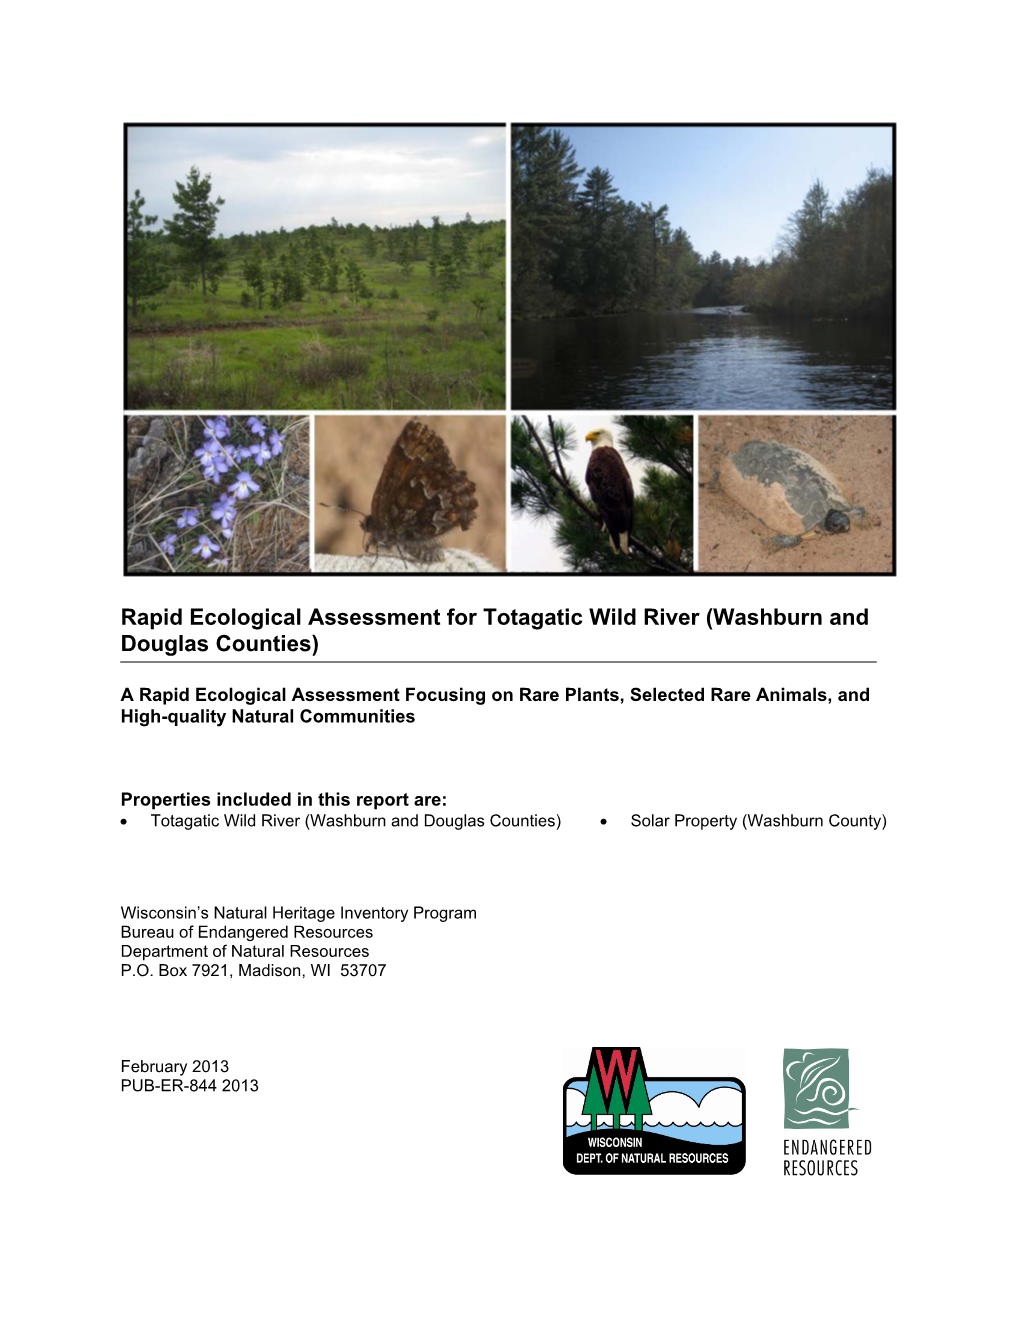 Rapid Ecological Assessment for Totagatic Wild River (Washburn and Douglas Counties)